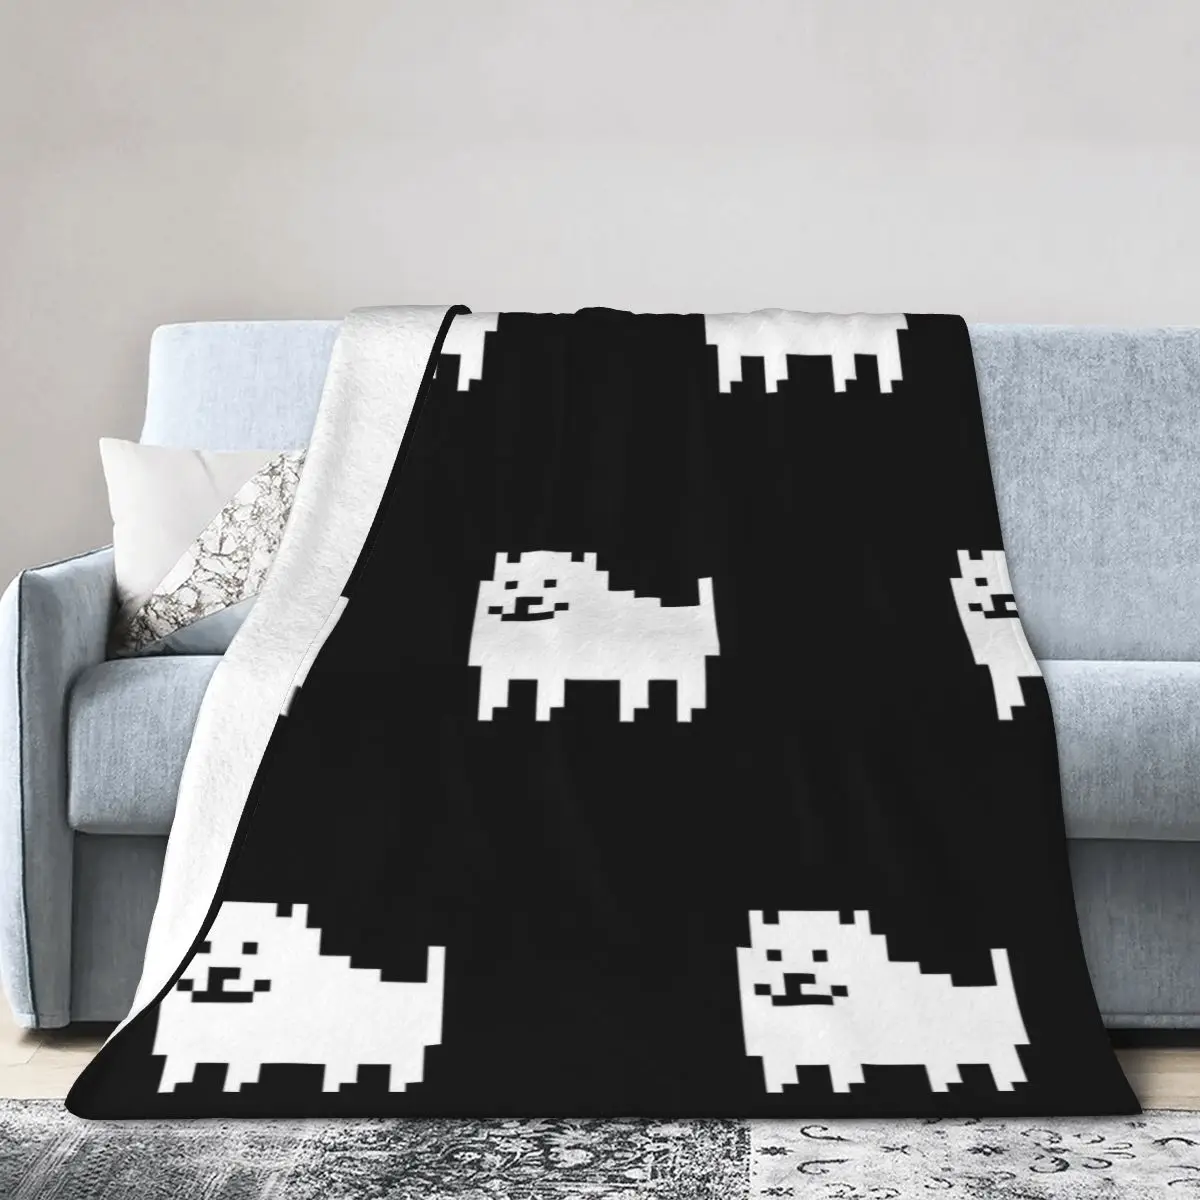 

Undertale Annoying Dog Blanket Bed Picnic Blanket Bedspread Ultralight Throw Blanket Non-stick Anti-pilling Microfibers washable